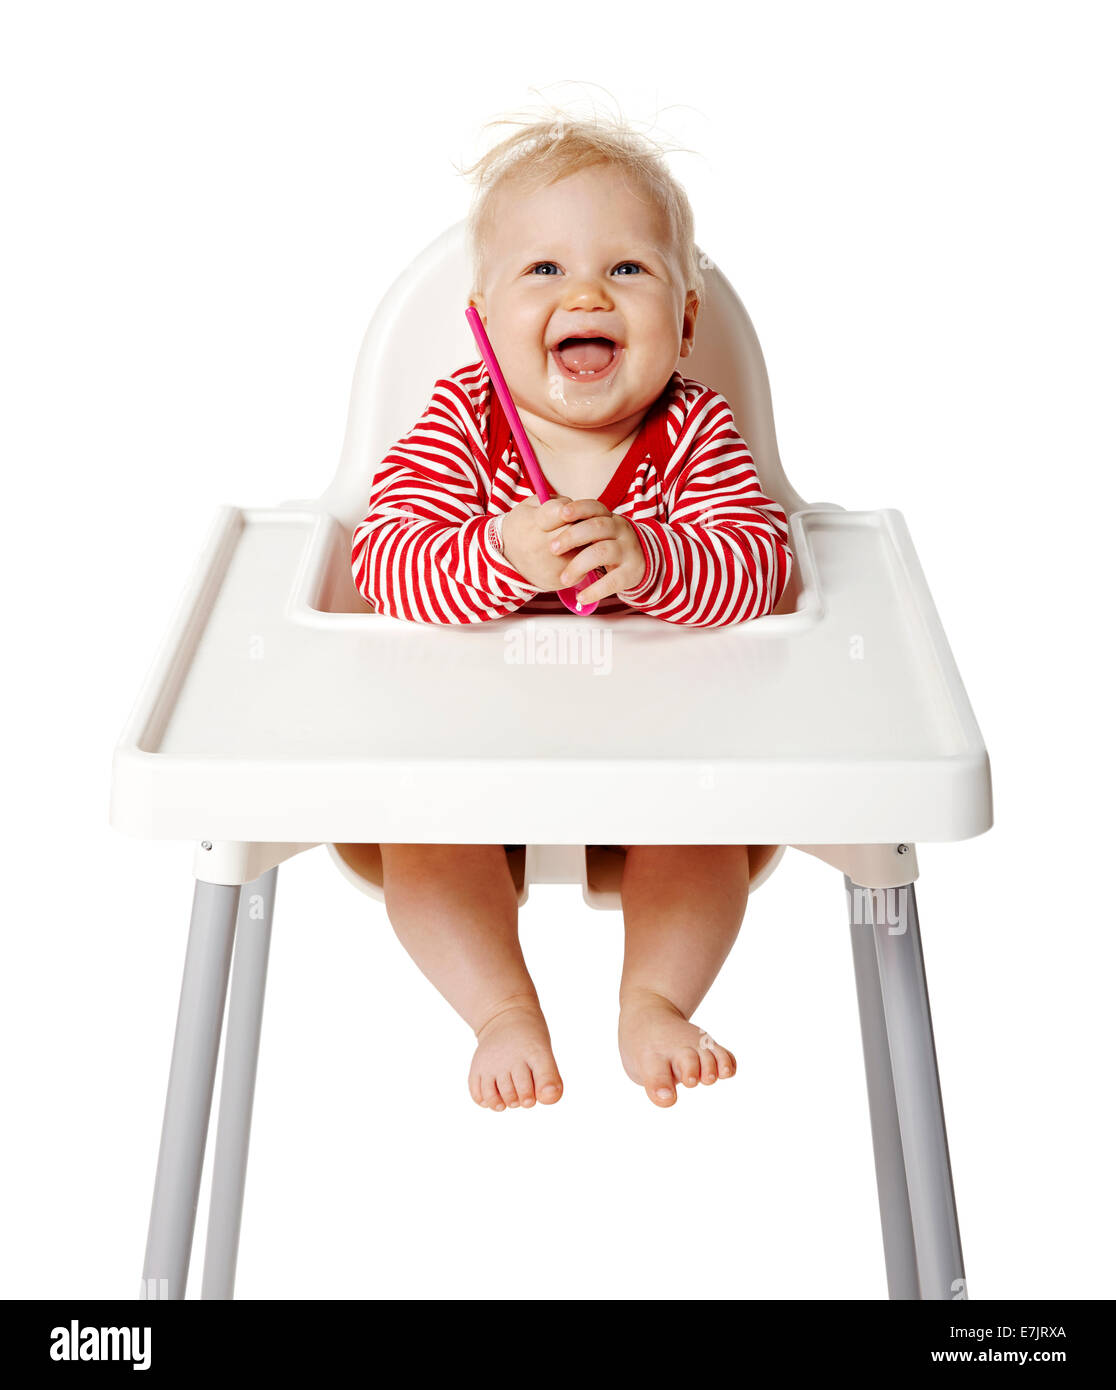 Baby sitting on chair and waiting for dinner. Isolated on white Background. Stock Photo